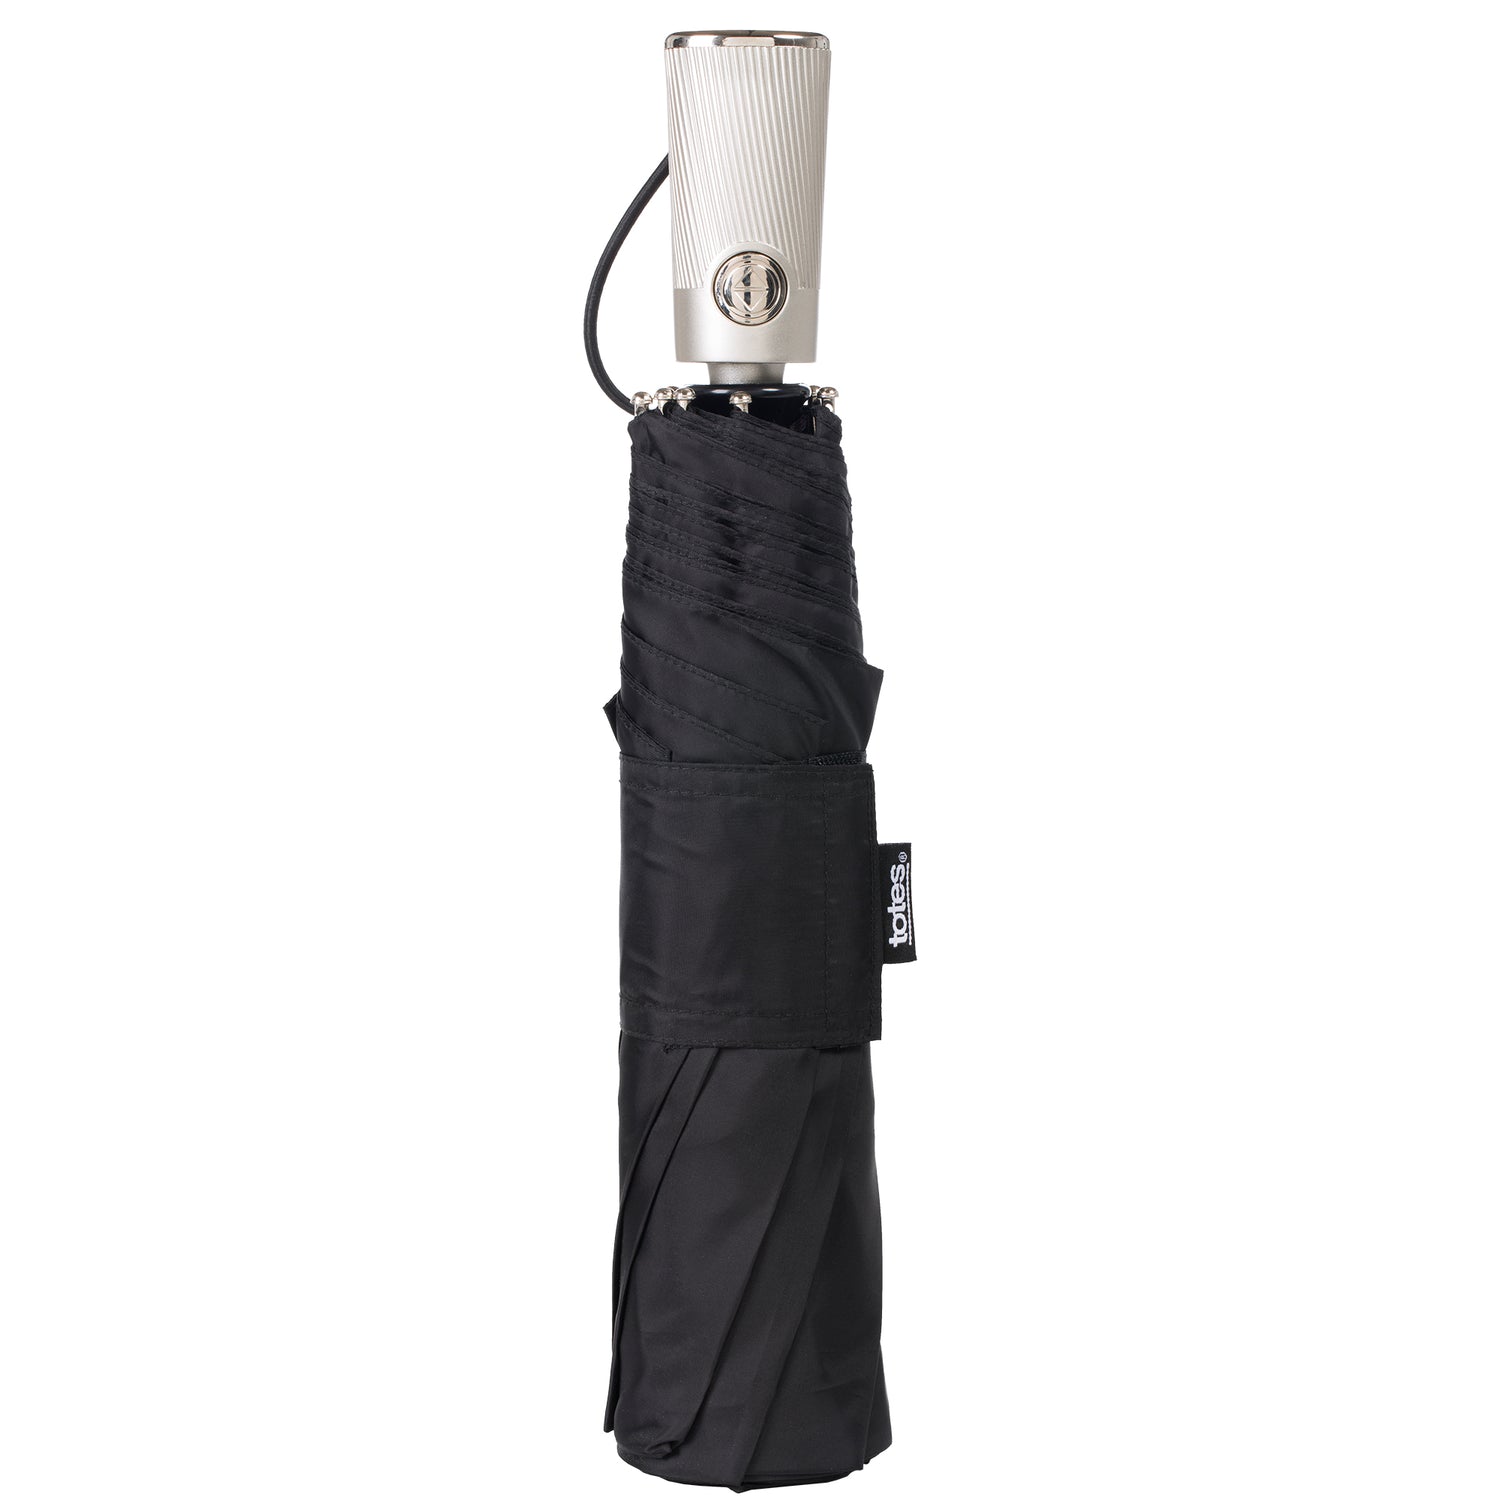 Extra-Large Recycled Vented Canopy Folding Umbrella with Auto Open/Close and Sunguard® Technology